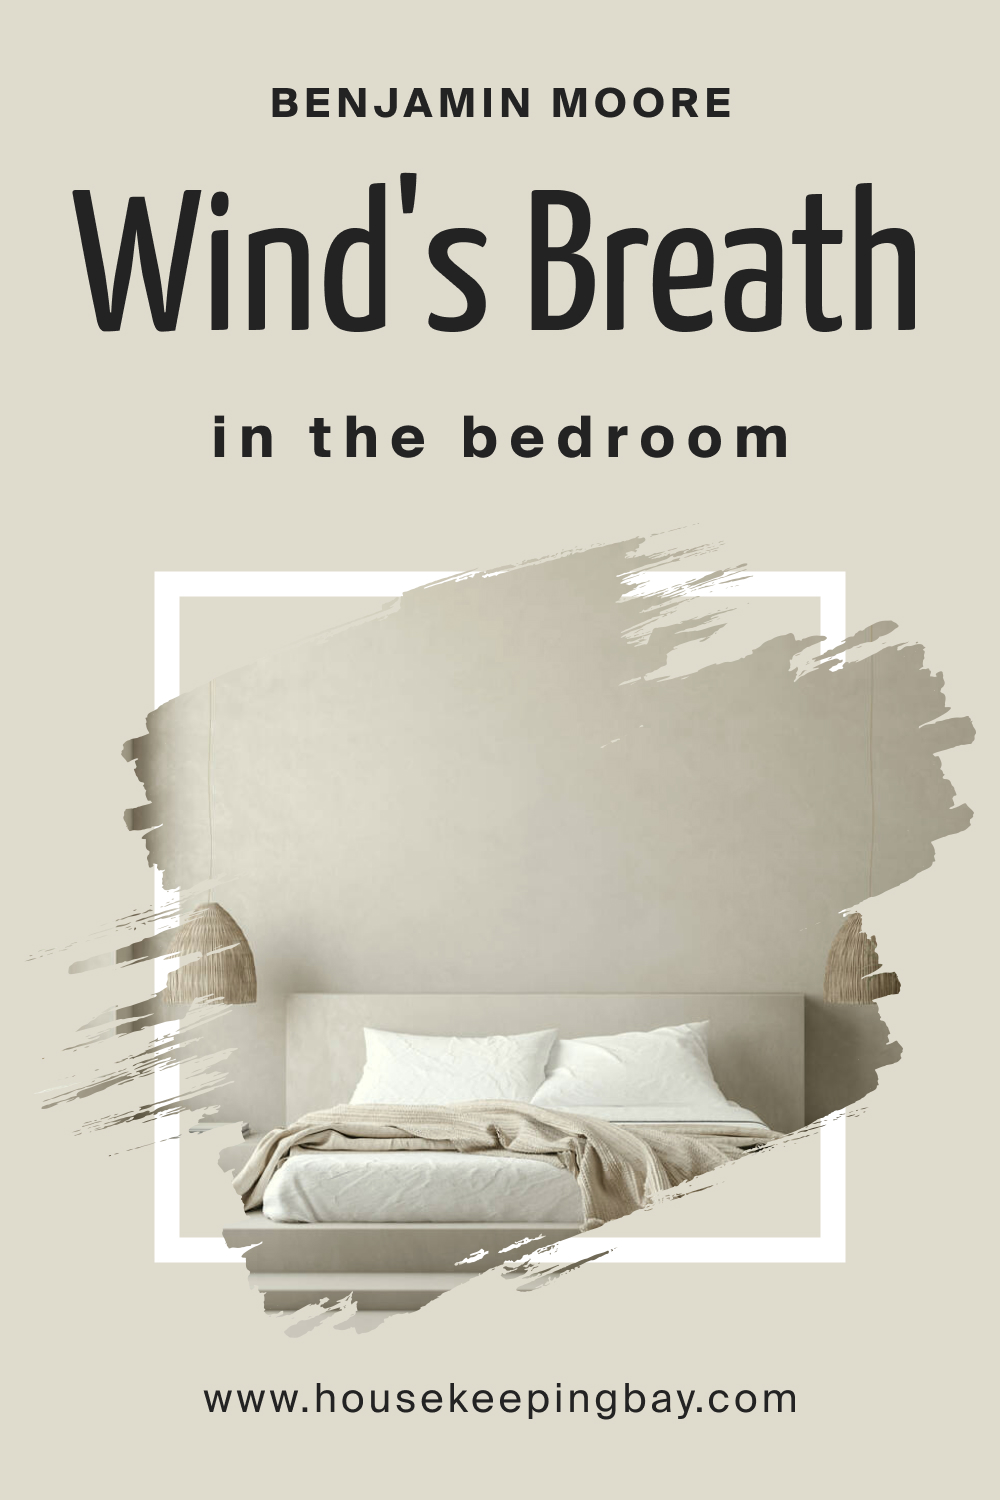 How to Use BM Wind's Breath 981 in the Bedroom?